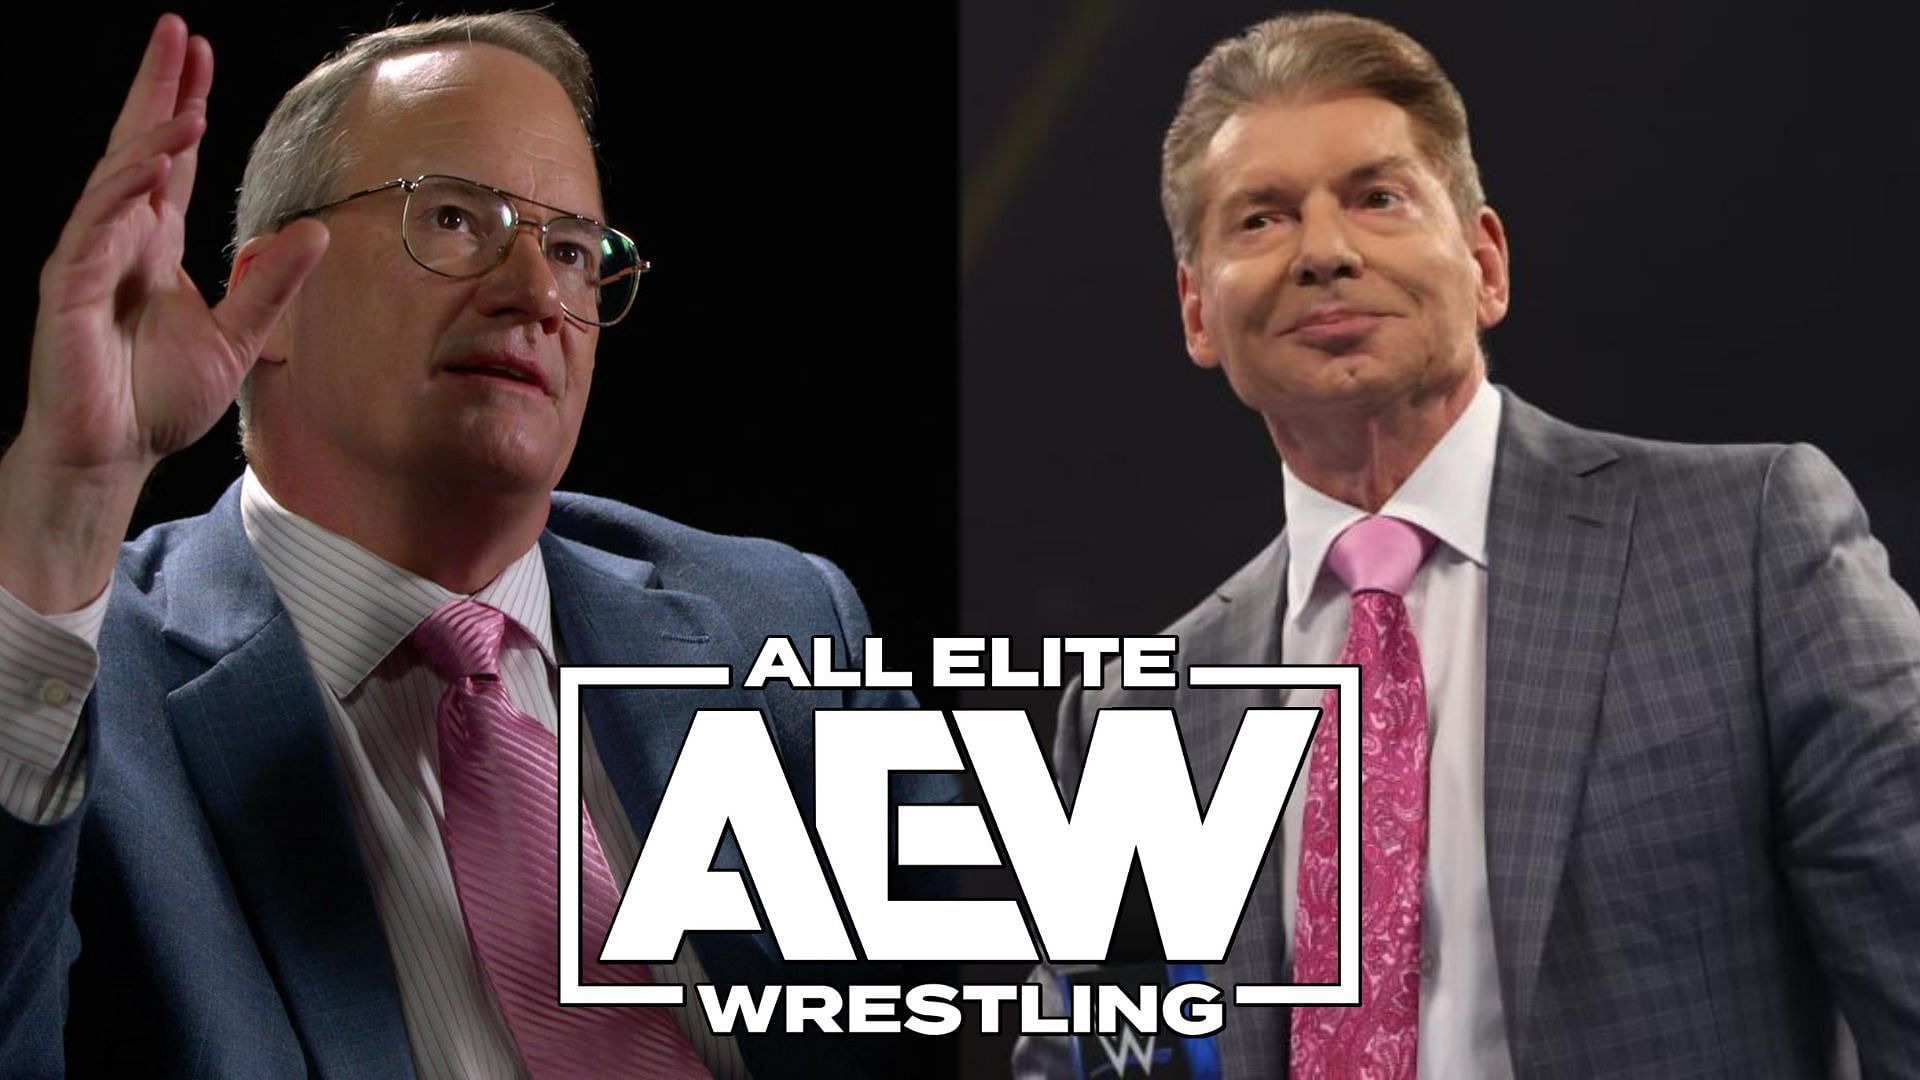 Is Jim Cornette correct in his assessments about Vince McMahon